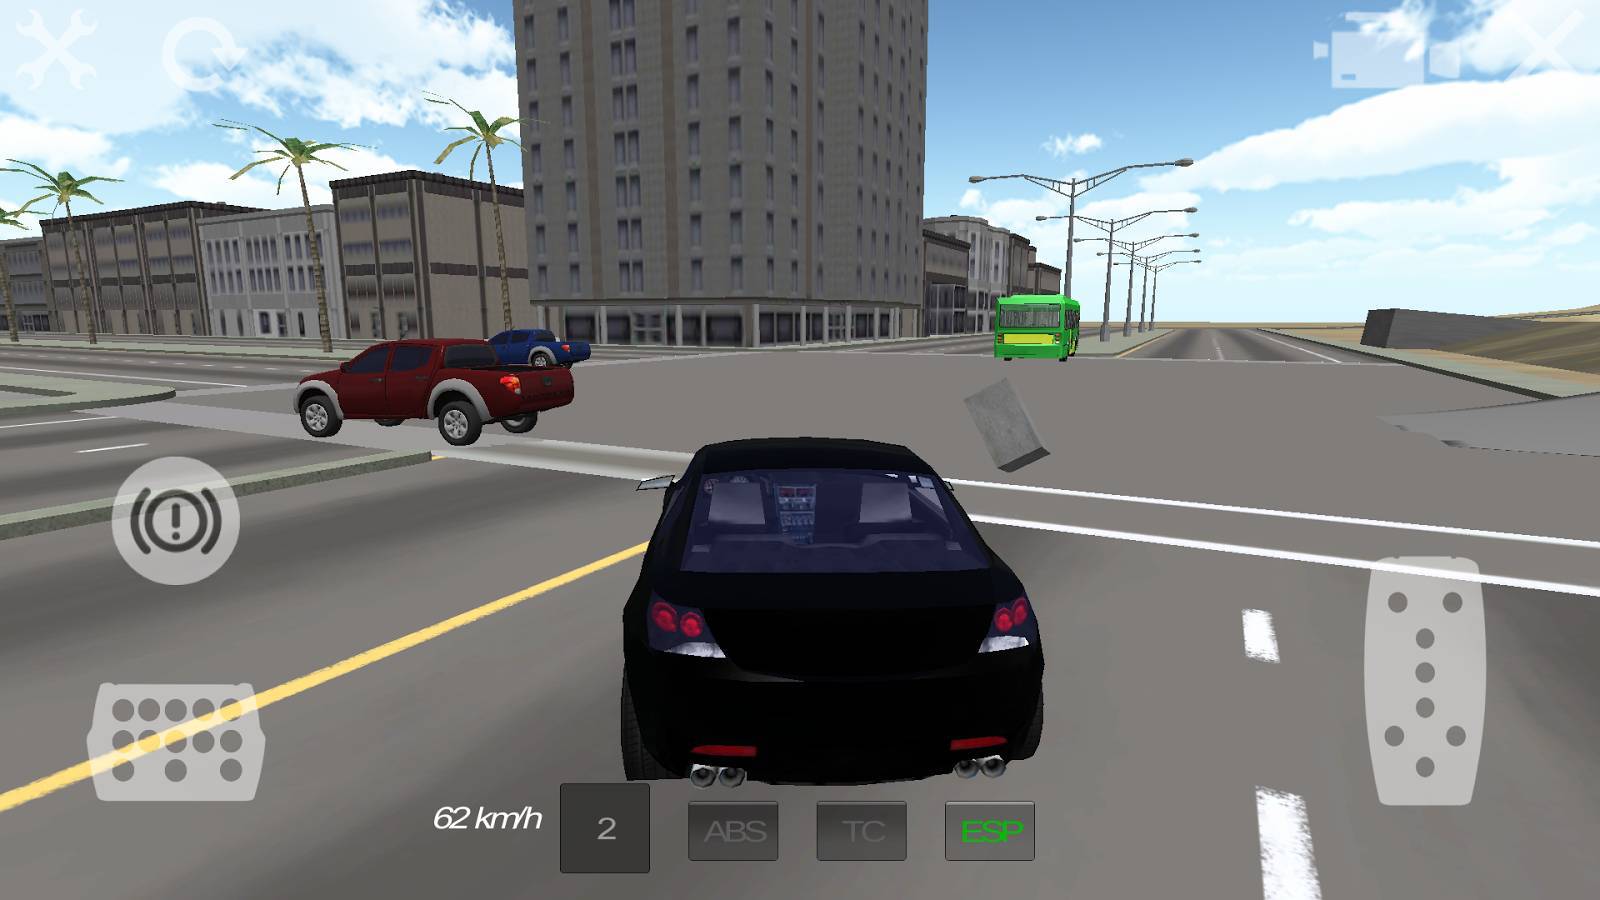 Candy car drive игра. Extreme car Driving 3d. Extreme car Driving Racing 3d Side. Винилы в extreme car Driving. Драйв 3 игра.